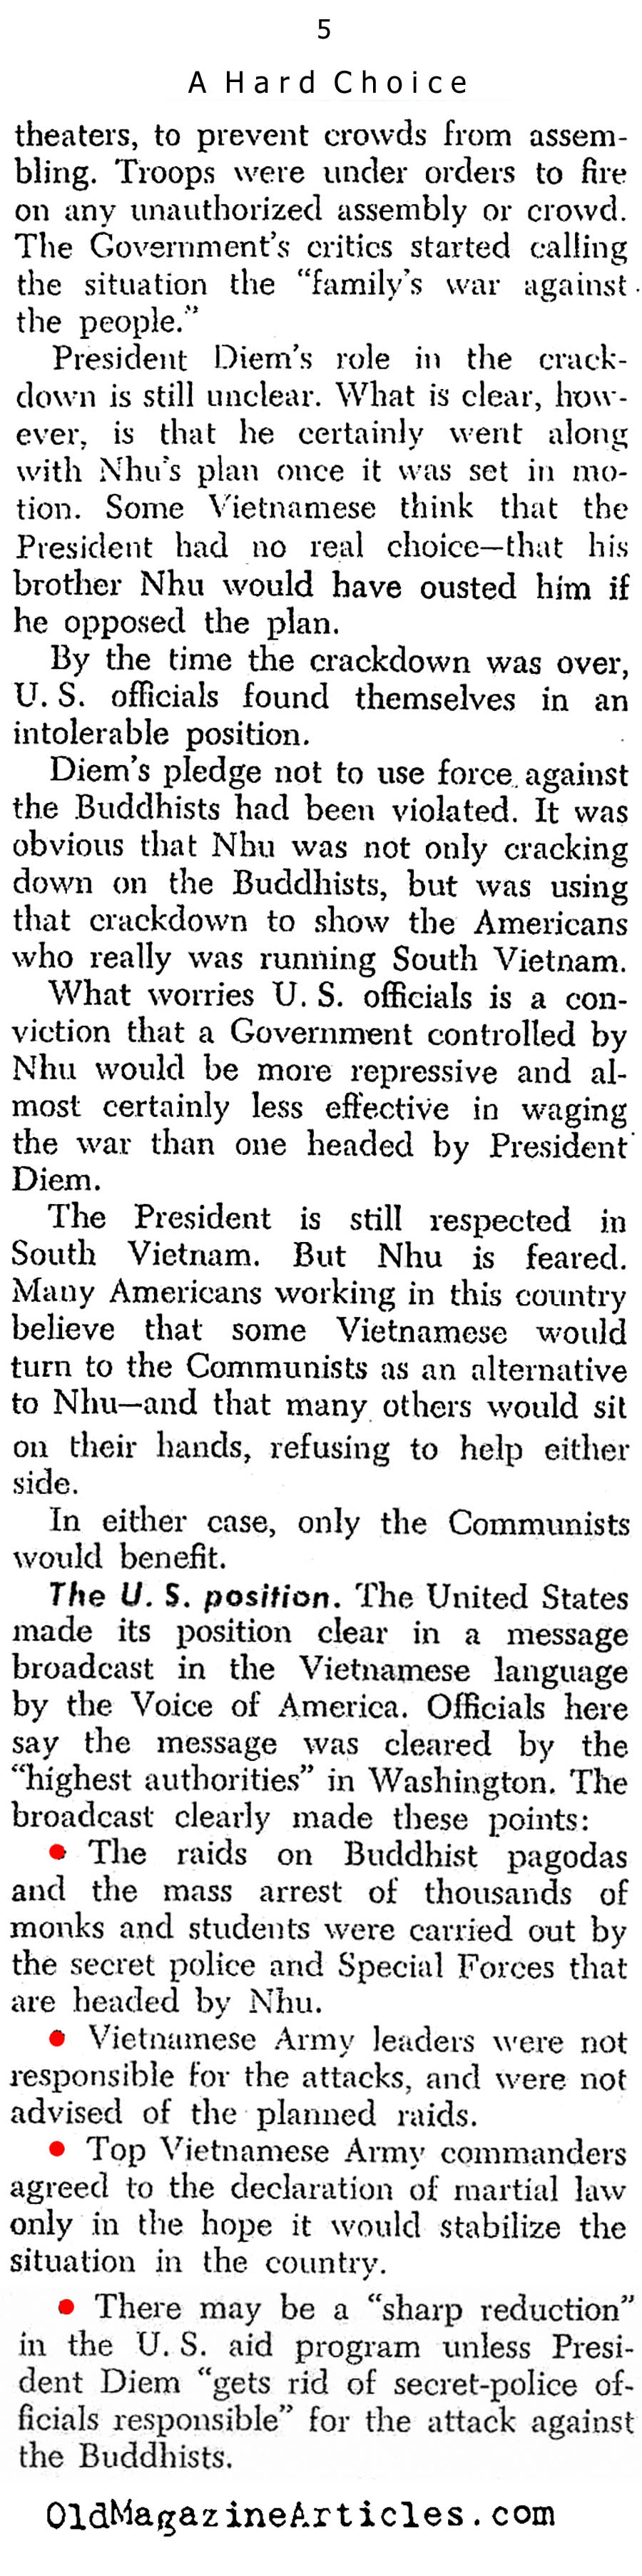 What To Do About Diem? (United States News, 1963)